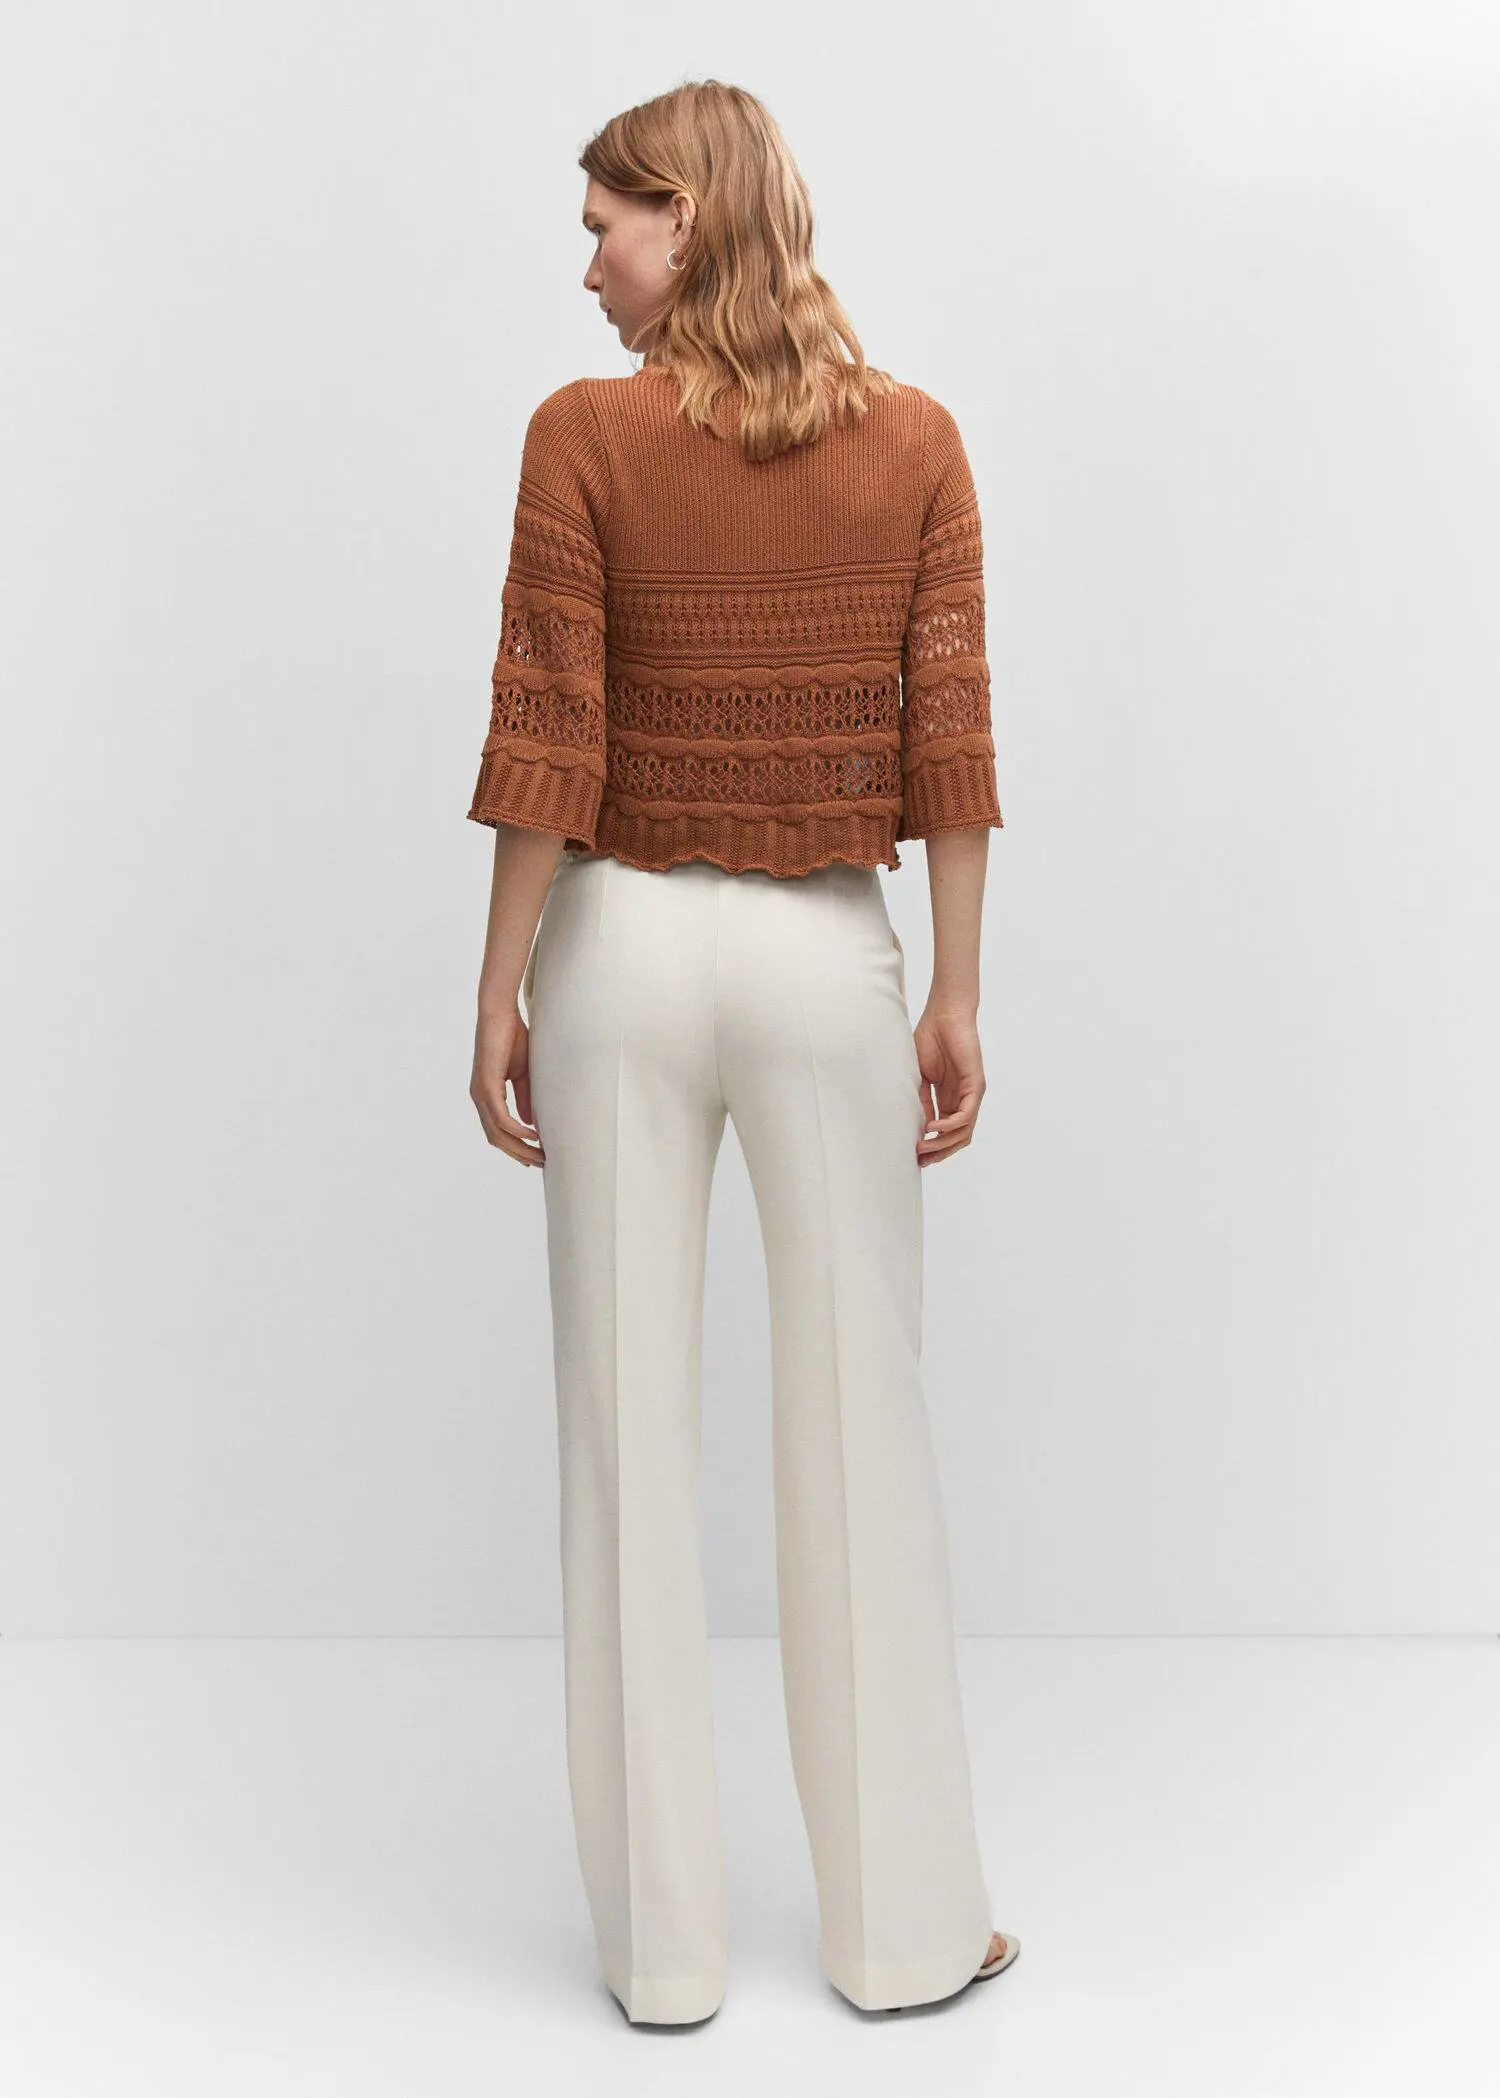 Mango Openwork sweater with flared sleeves. a woman wearing a brown sweater and white pants. 